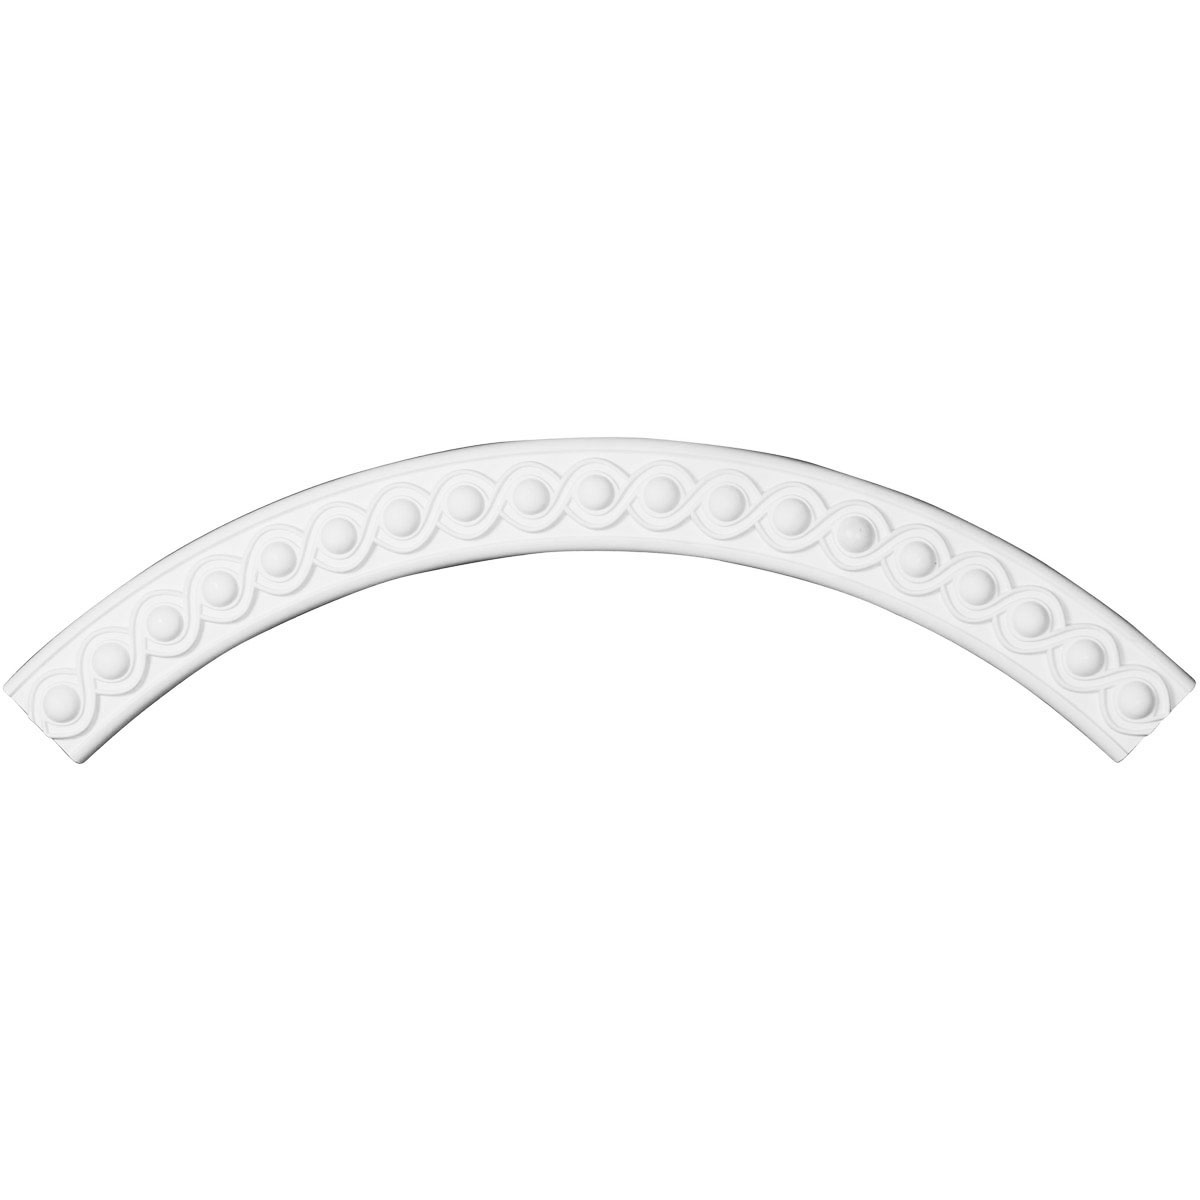 50 X 43.38 X 3.38 X 1 In. Hillsborough Ceiling Ring - 0.25 Of Complete Circle